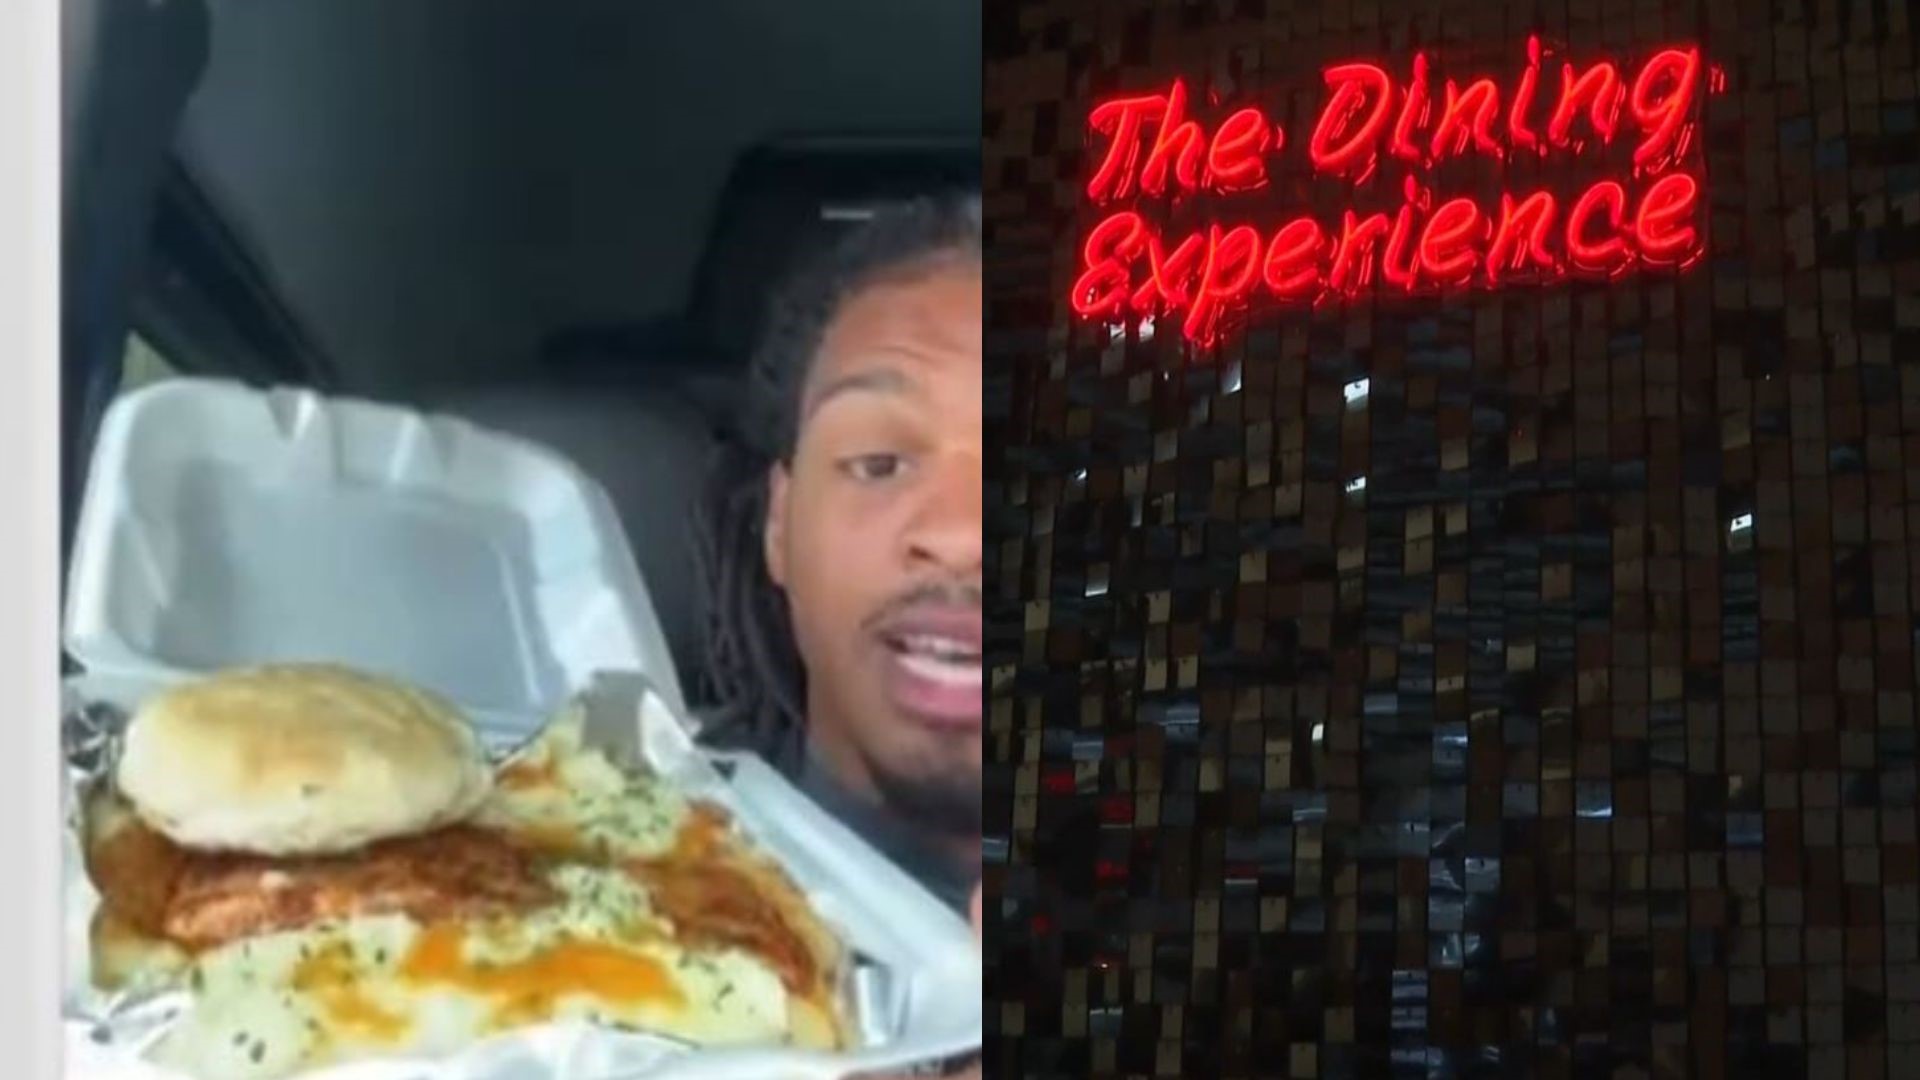 The Dining Experience in Fairburn was one of the restaurants that the viral TikTok food critic left a decent review.